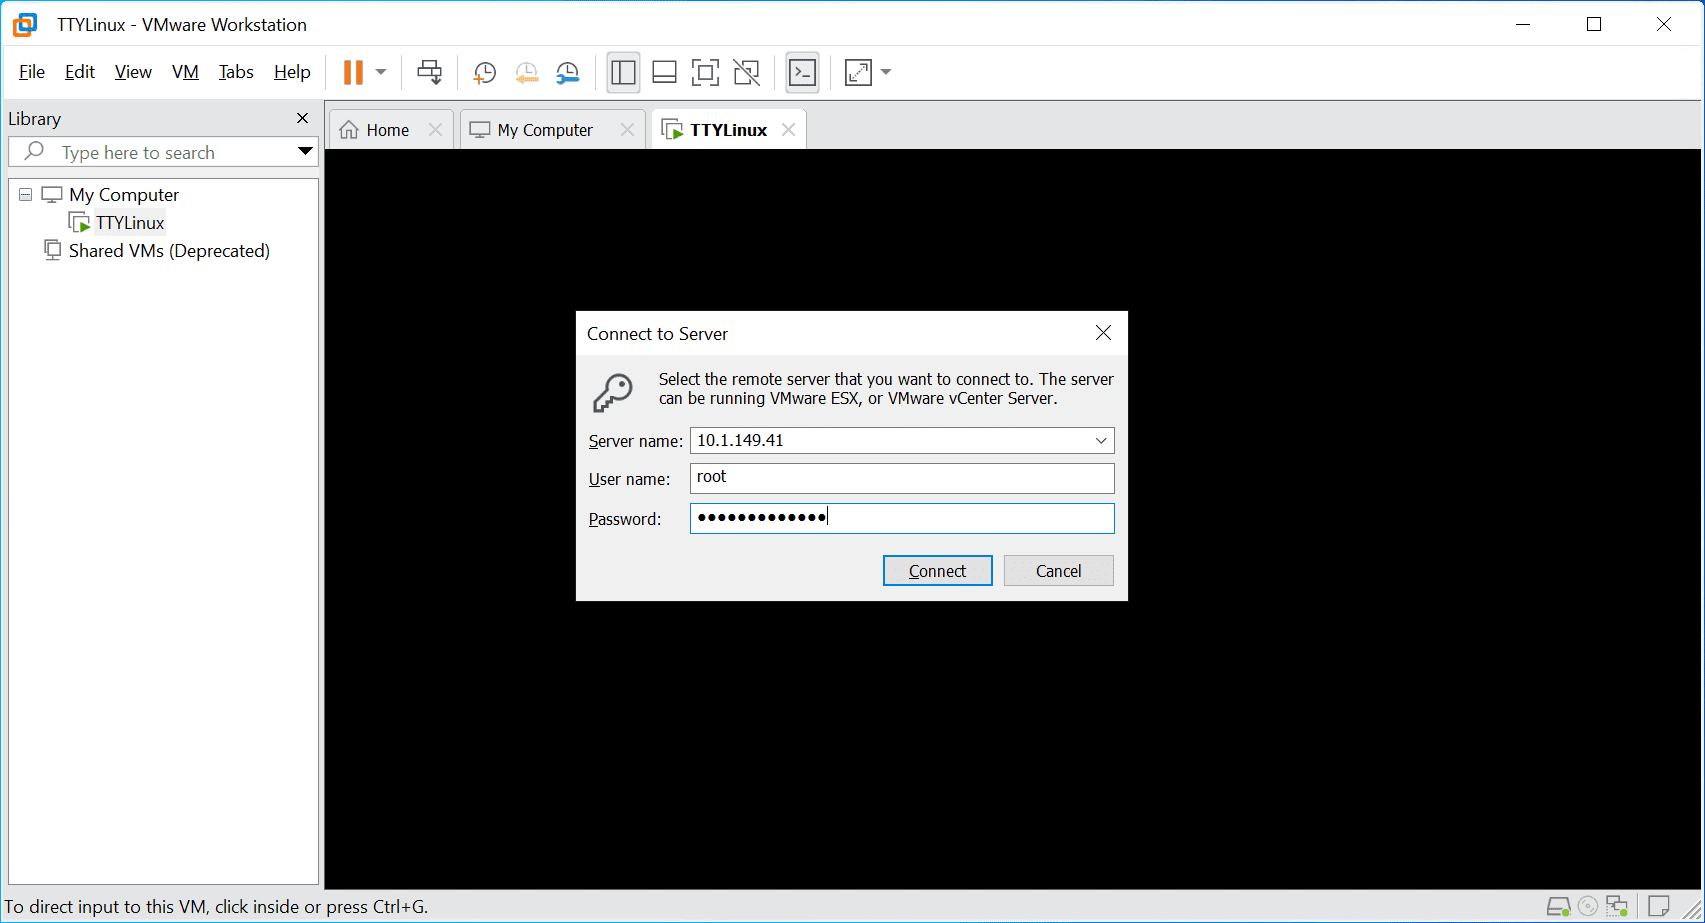 Enter the connection information for the esxi host